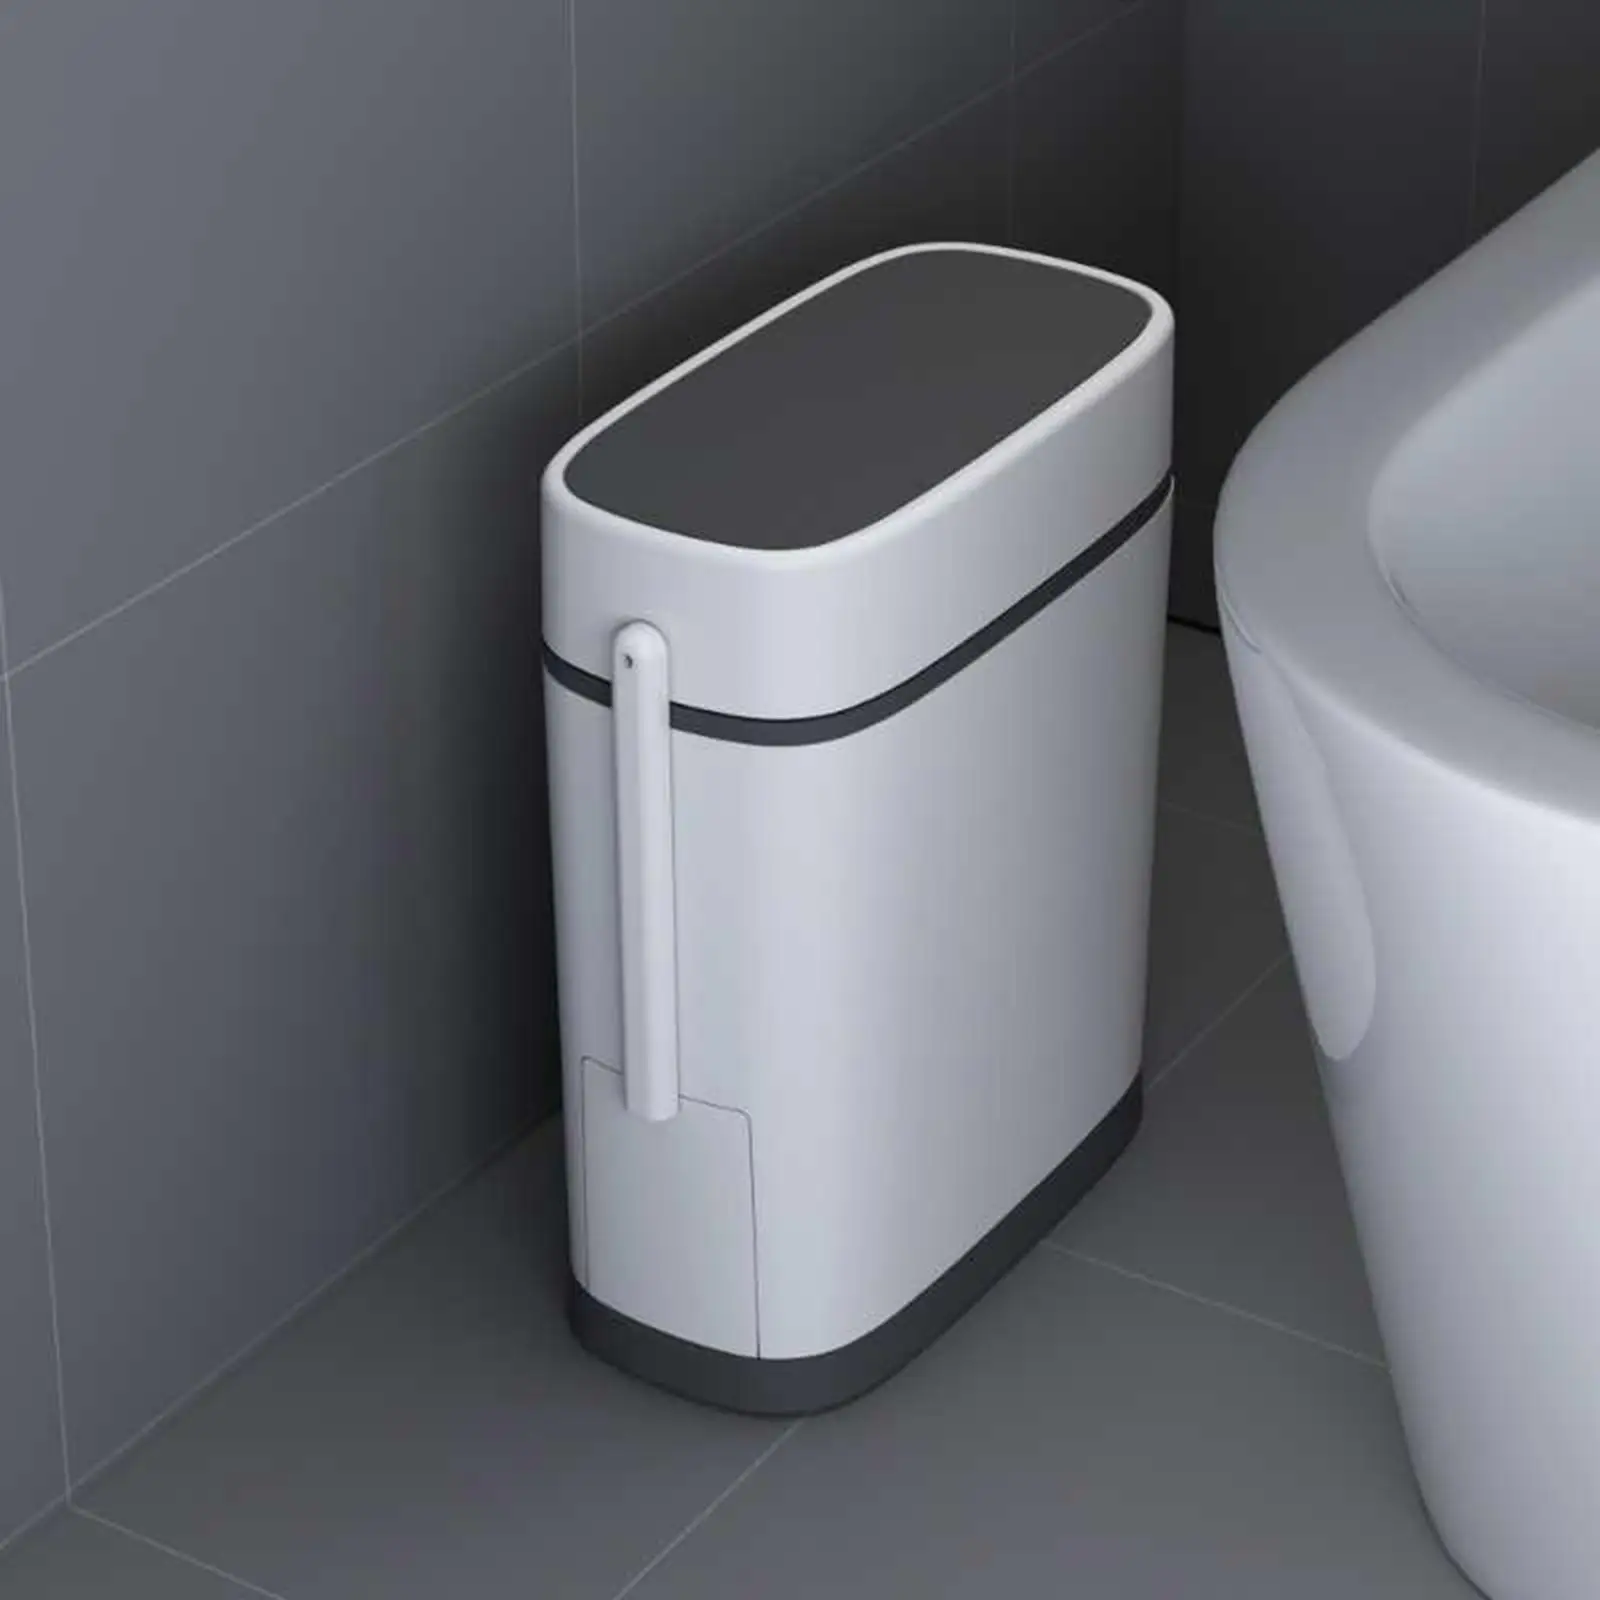 Narrow Trash Can with Toilet Brush Dustbin Bucket for Bathroom Bedroom Living room and home RV